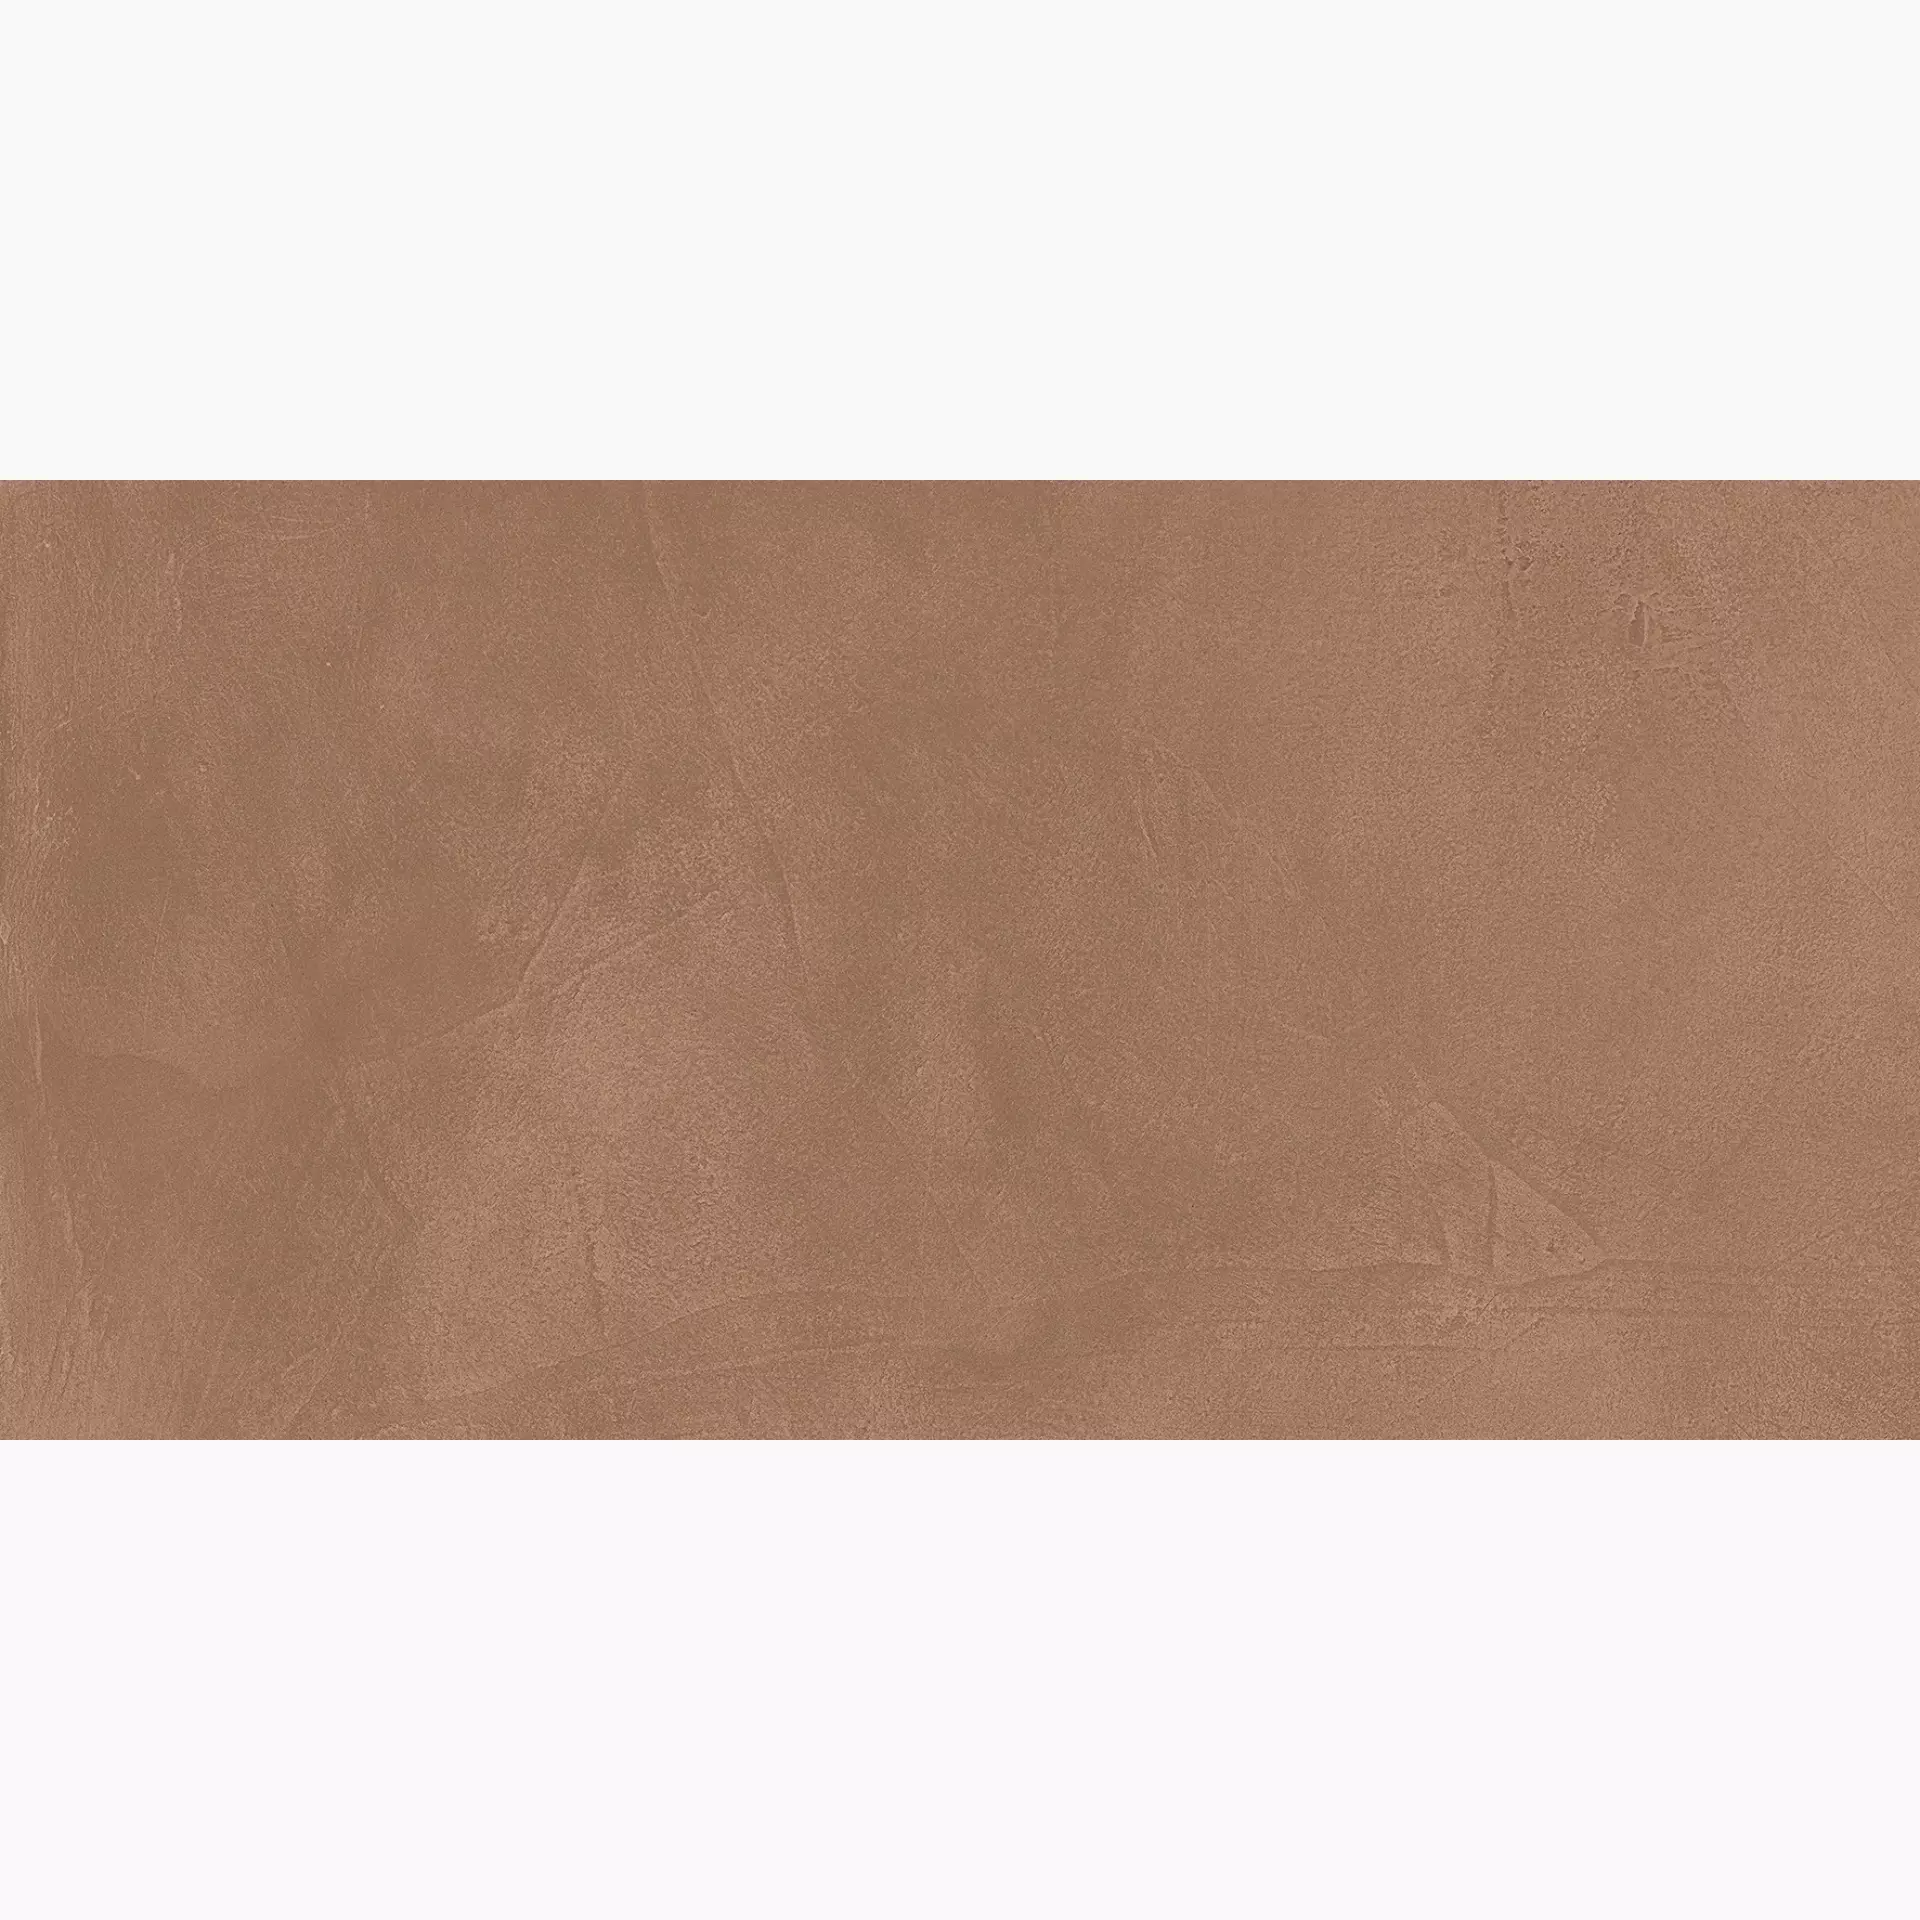 Del Conca Htl Timeline Canyon Htl6 Naturale G8TL06R 30x60cm rectified 8,5mm